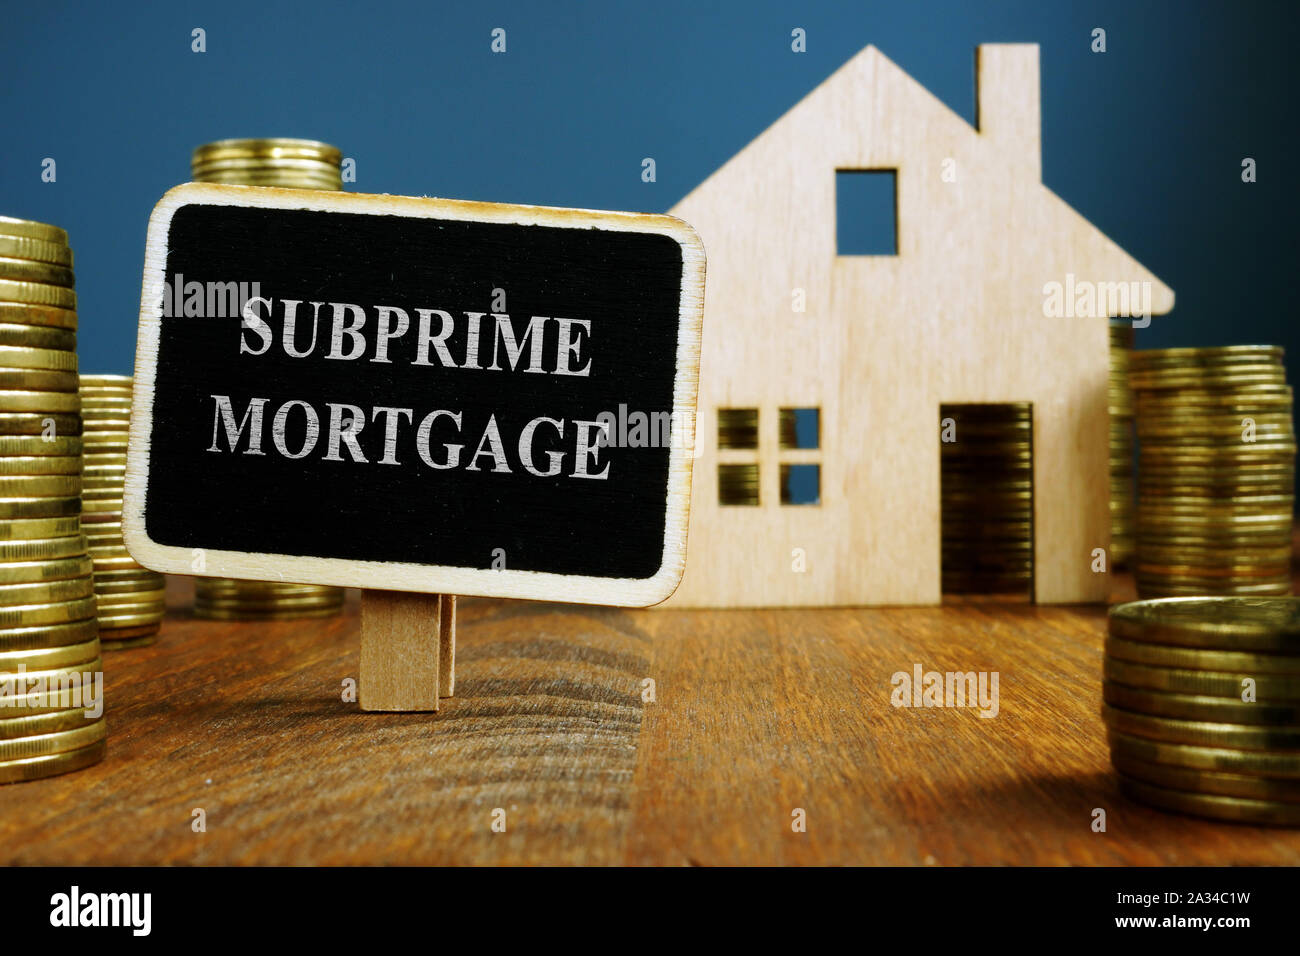 Subprime mortgage plate and model of home. Stock Photo